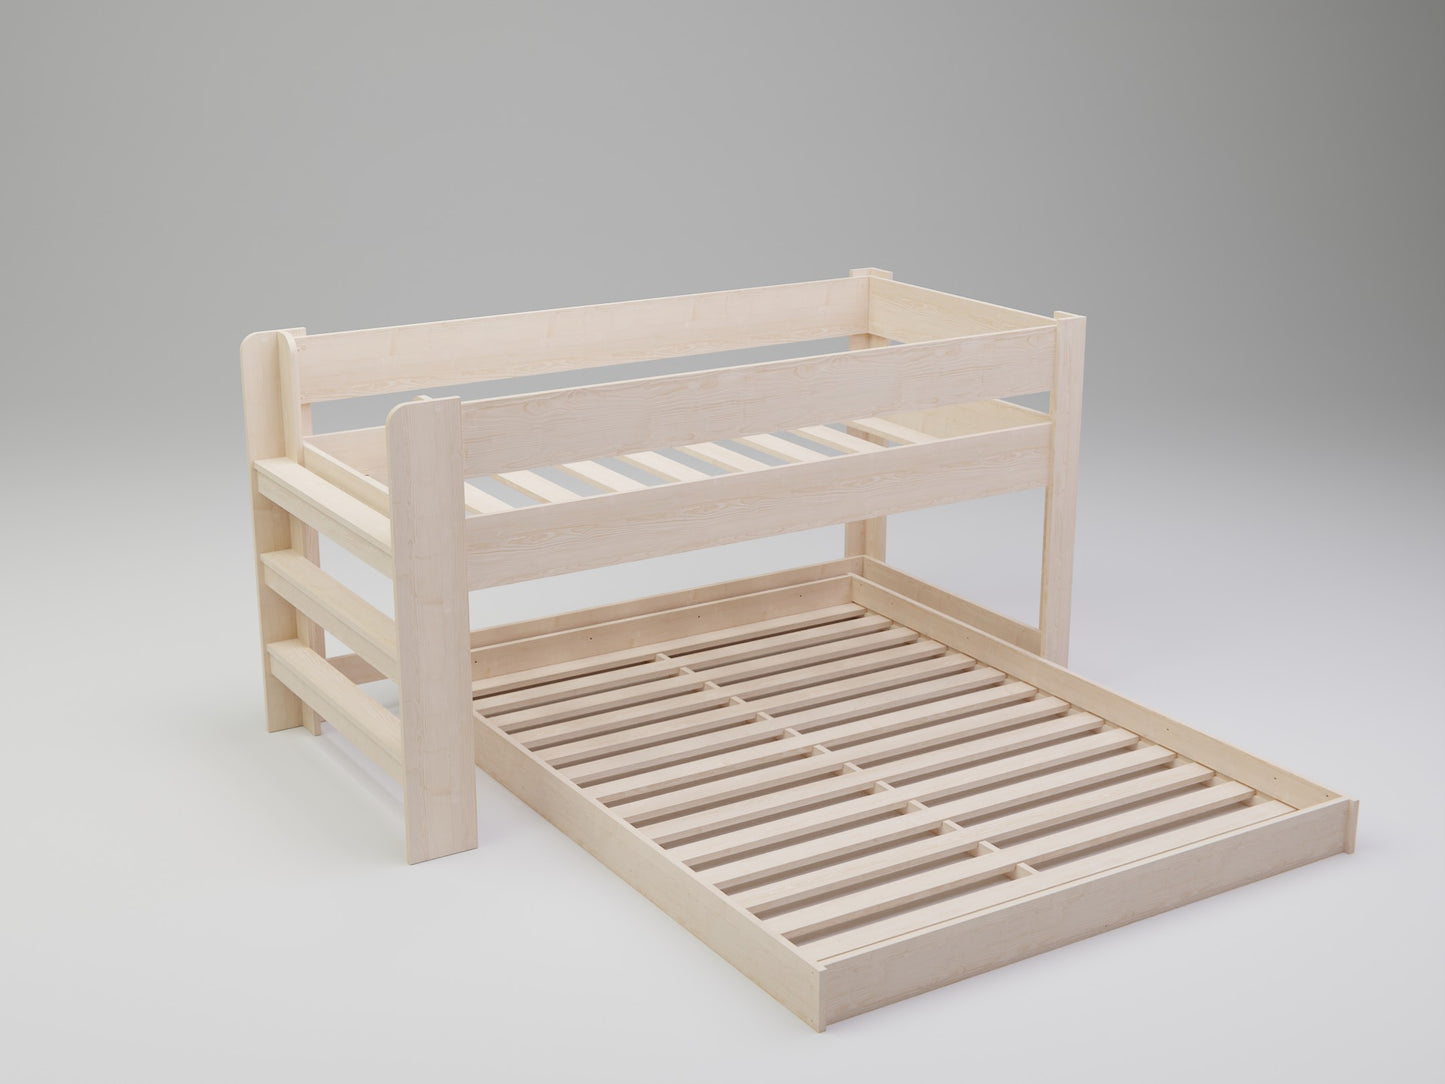 Maximize sleeping space without compromising style with our L-shaped triple bunk bed. Ideal for large families or sleepovers.